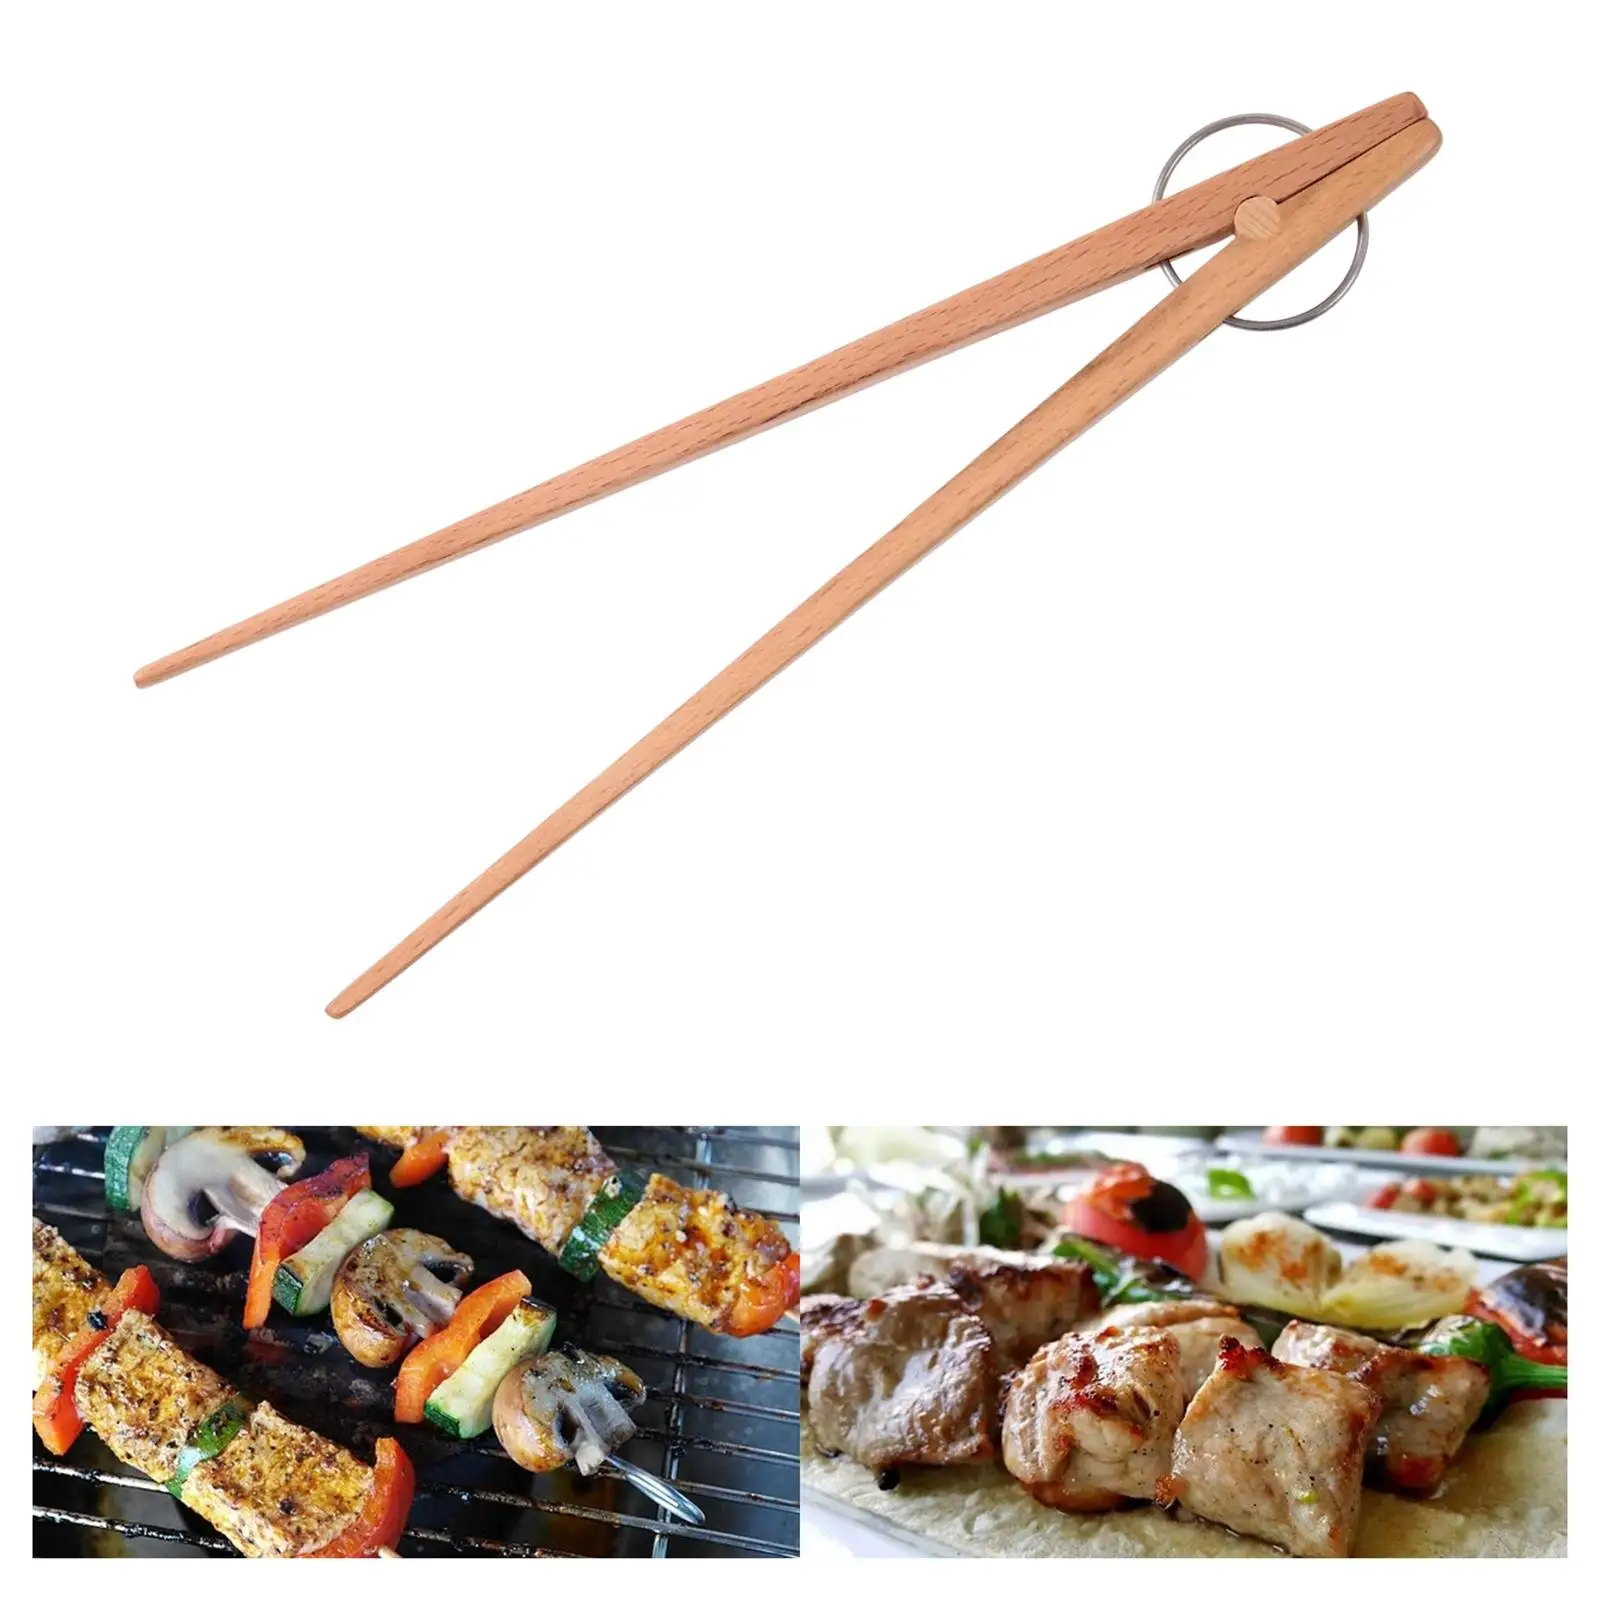 Wood Pastry Clamp Kitchen Tools Utensils Bread Clip Kitchenware Buffet Clip Food Clips for Bakery Barbecue Camping Baking Picnic